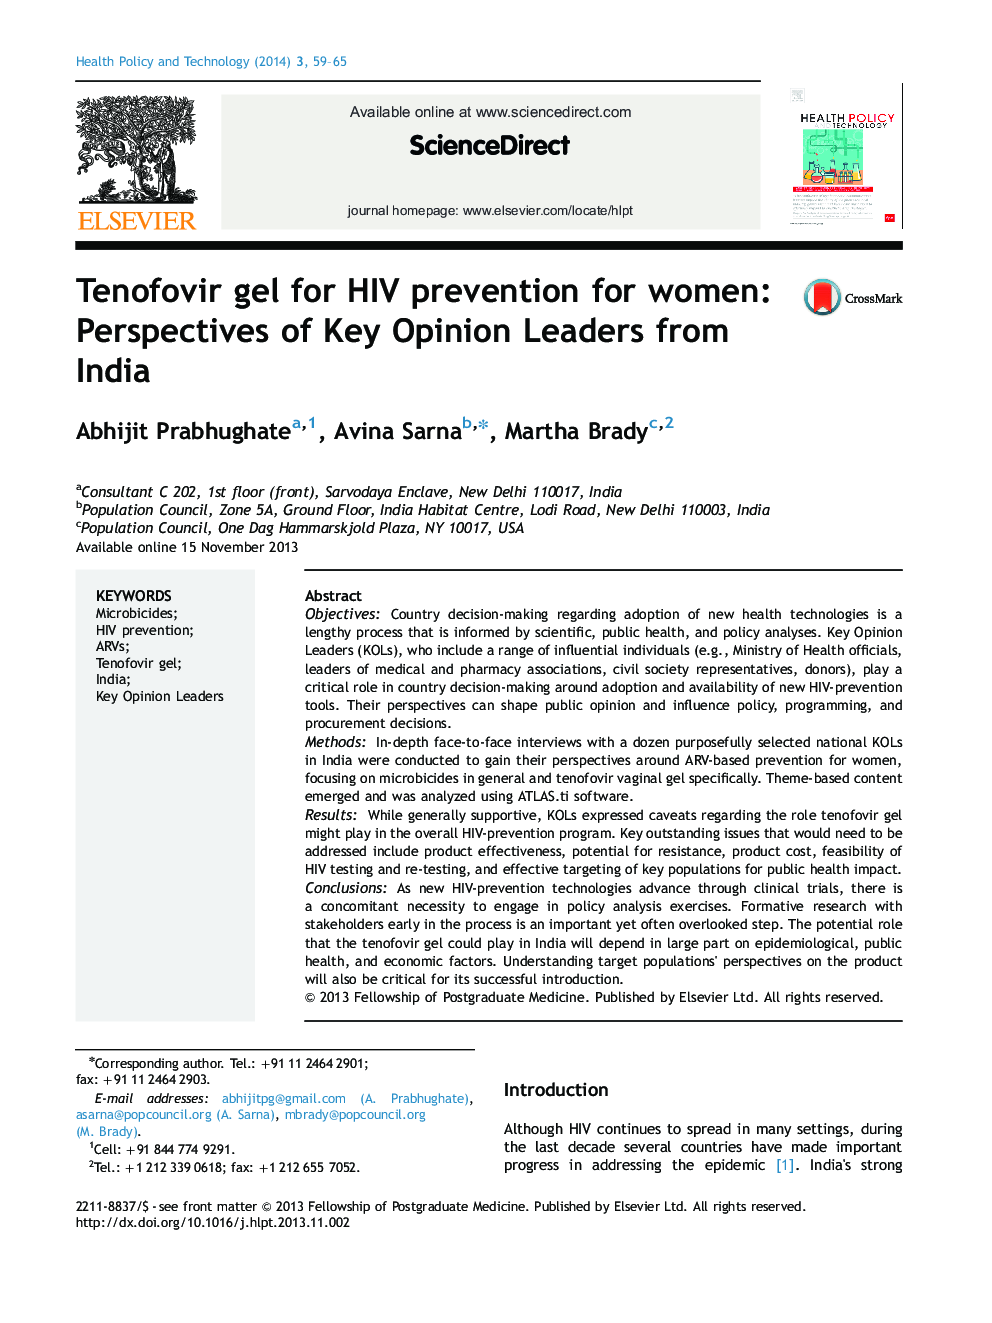 Tenofovir gel for HIV prevention for women: Perspectives of Key Opinion Leaders from India